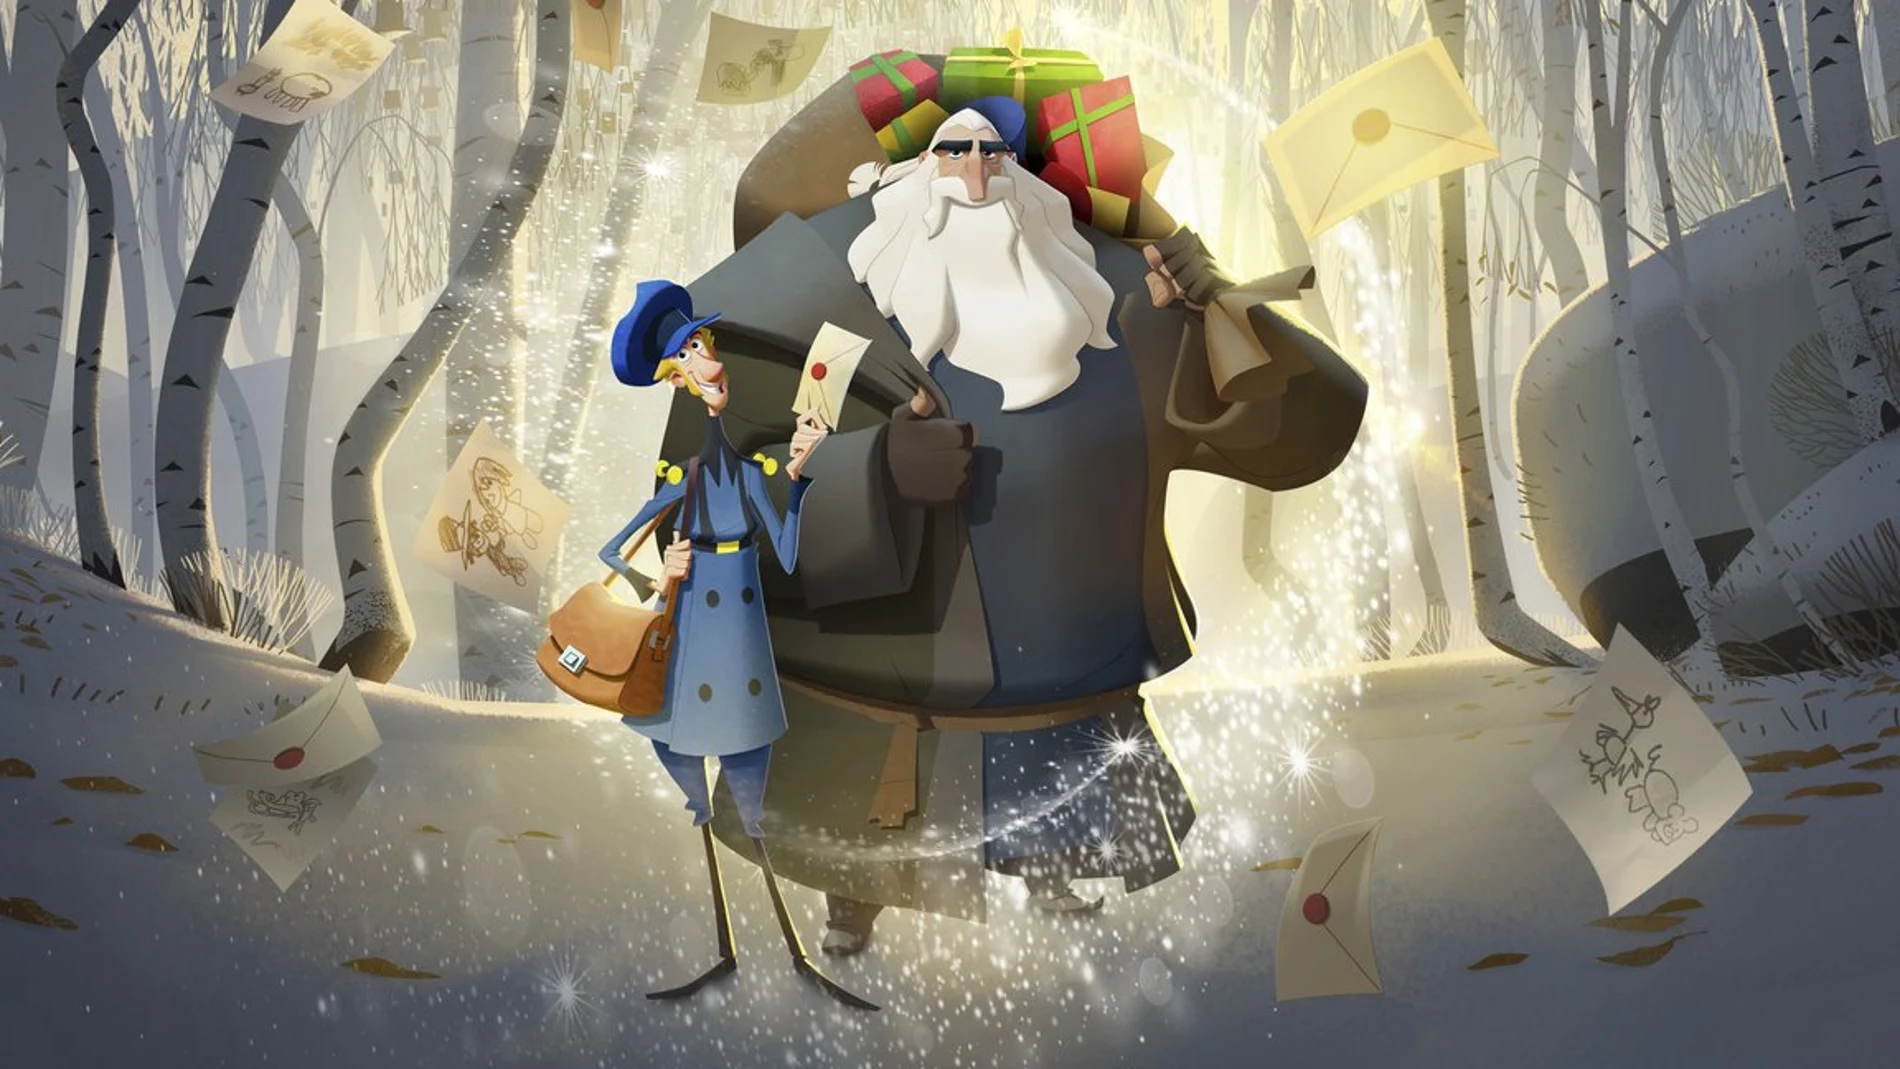 This image released by Netflix shows characters Jesper, voiced by Jason Schwartzman, left, and Klaus, voiced by J.K. Simmons, in a scene from the Oscar-nominated animated film "Klaus." (Netflix via AP)